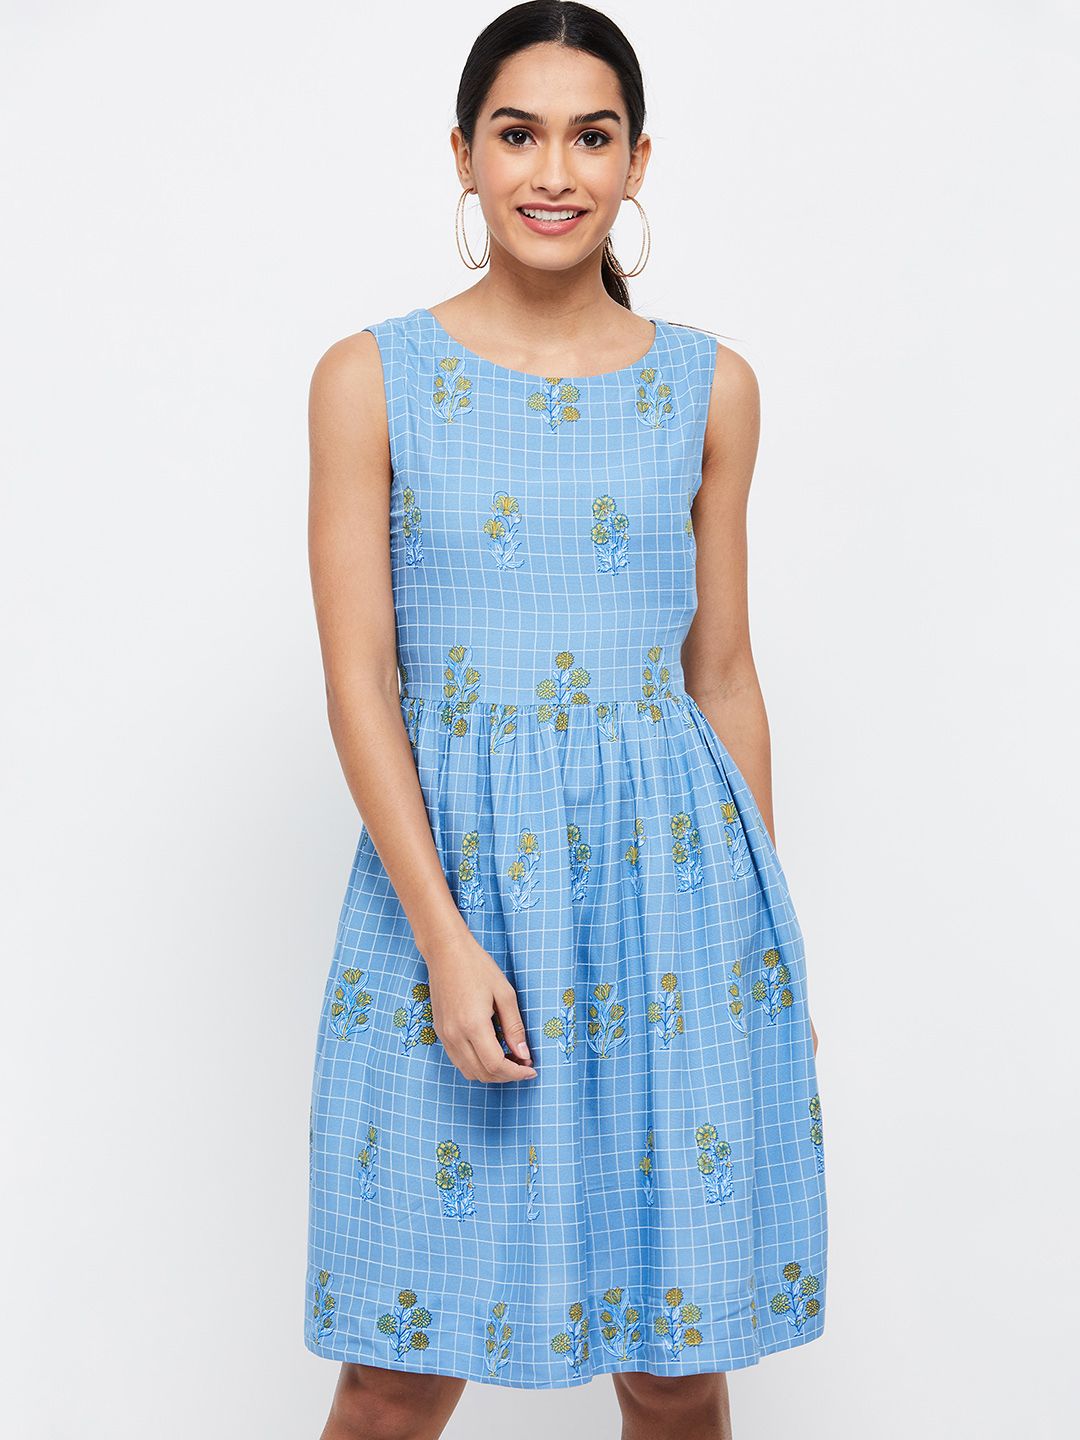 max Women Blue Floral Fit and Flare Dress Price in India